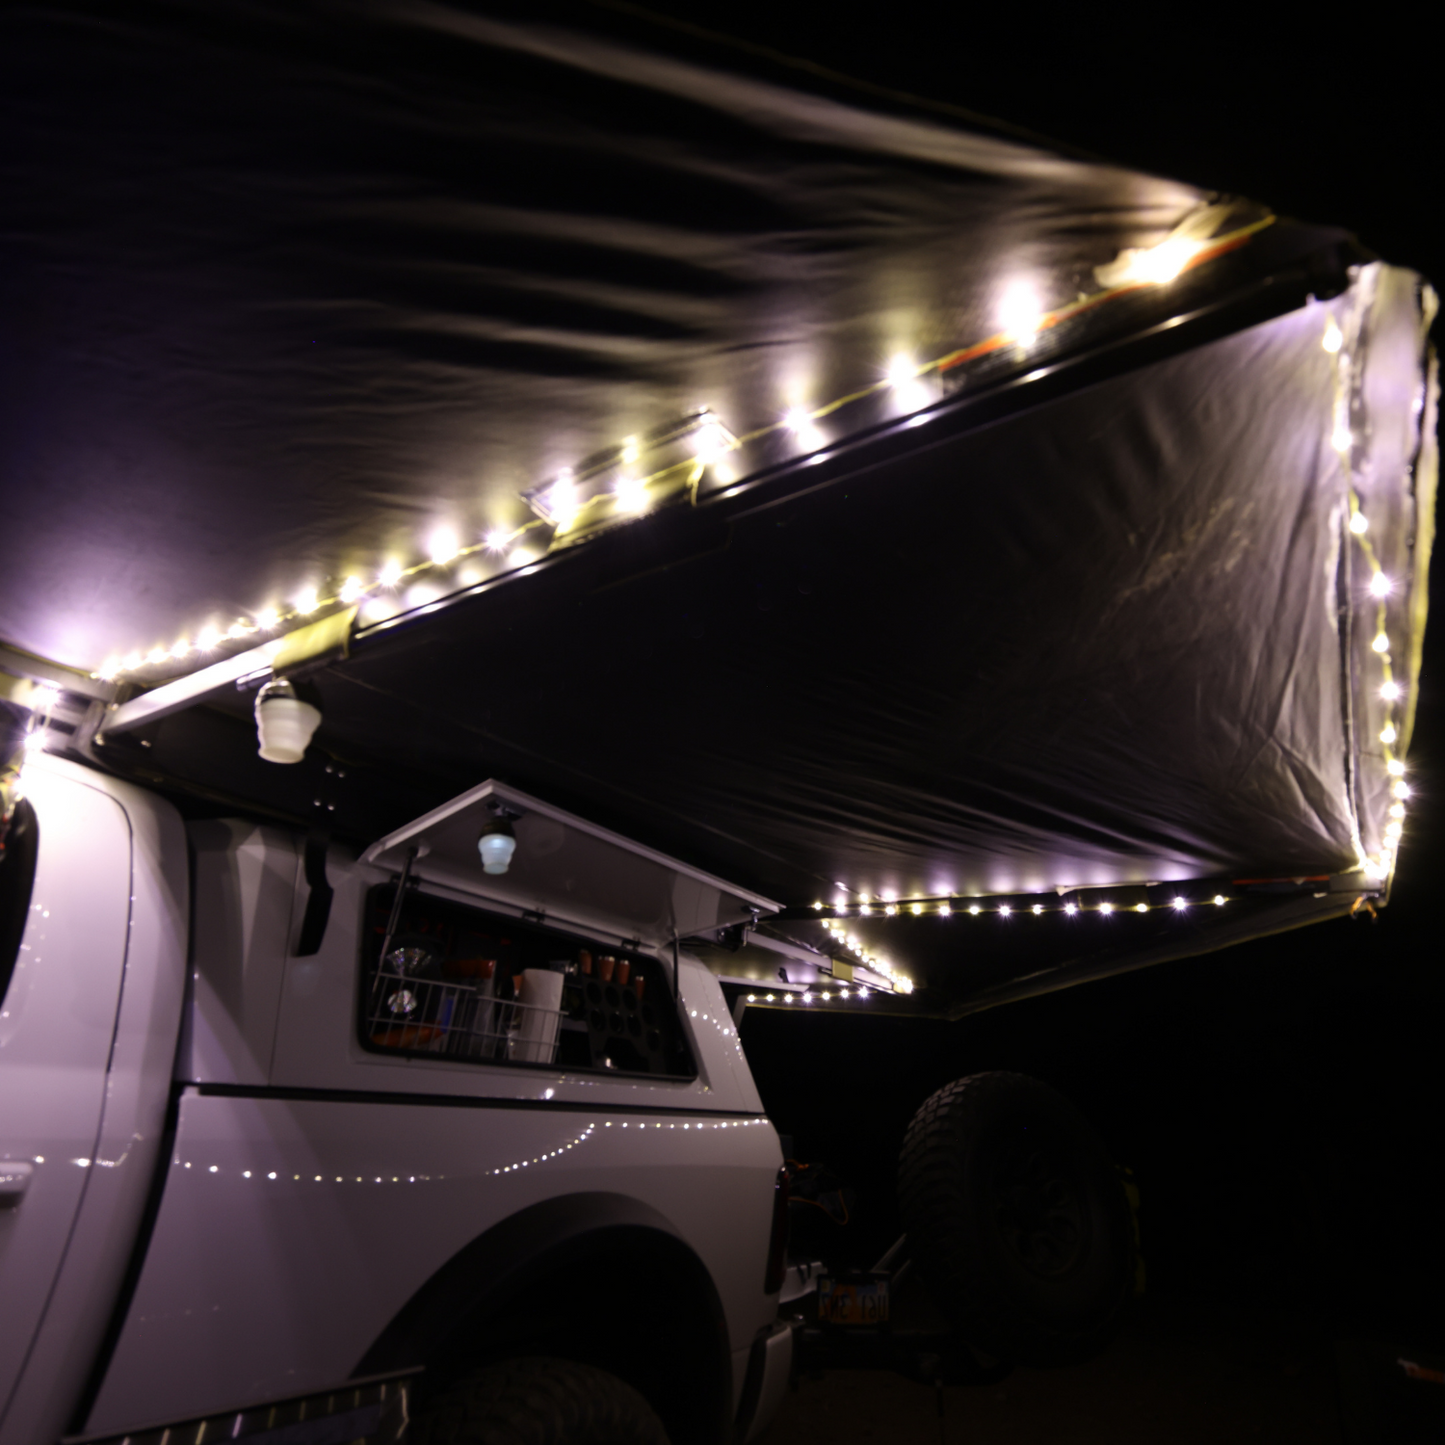 270° PEREGRINE AWNING RIGHT-HAND MOUNTED + LIGHT SUPPRESSION TECHNOLOGY